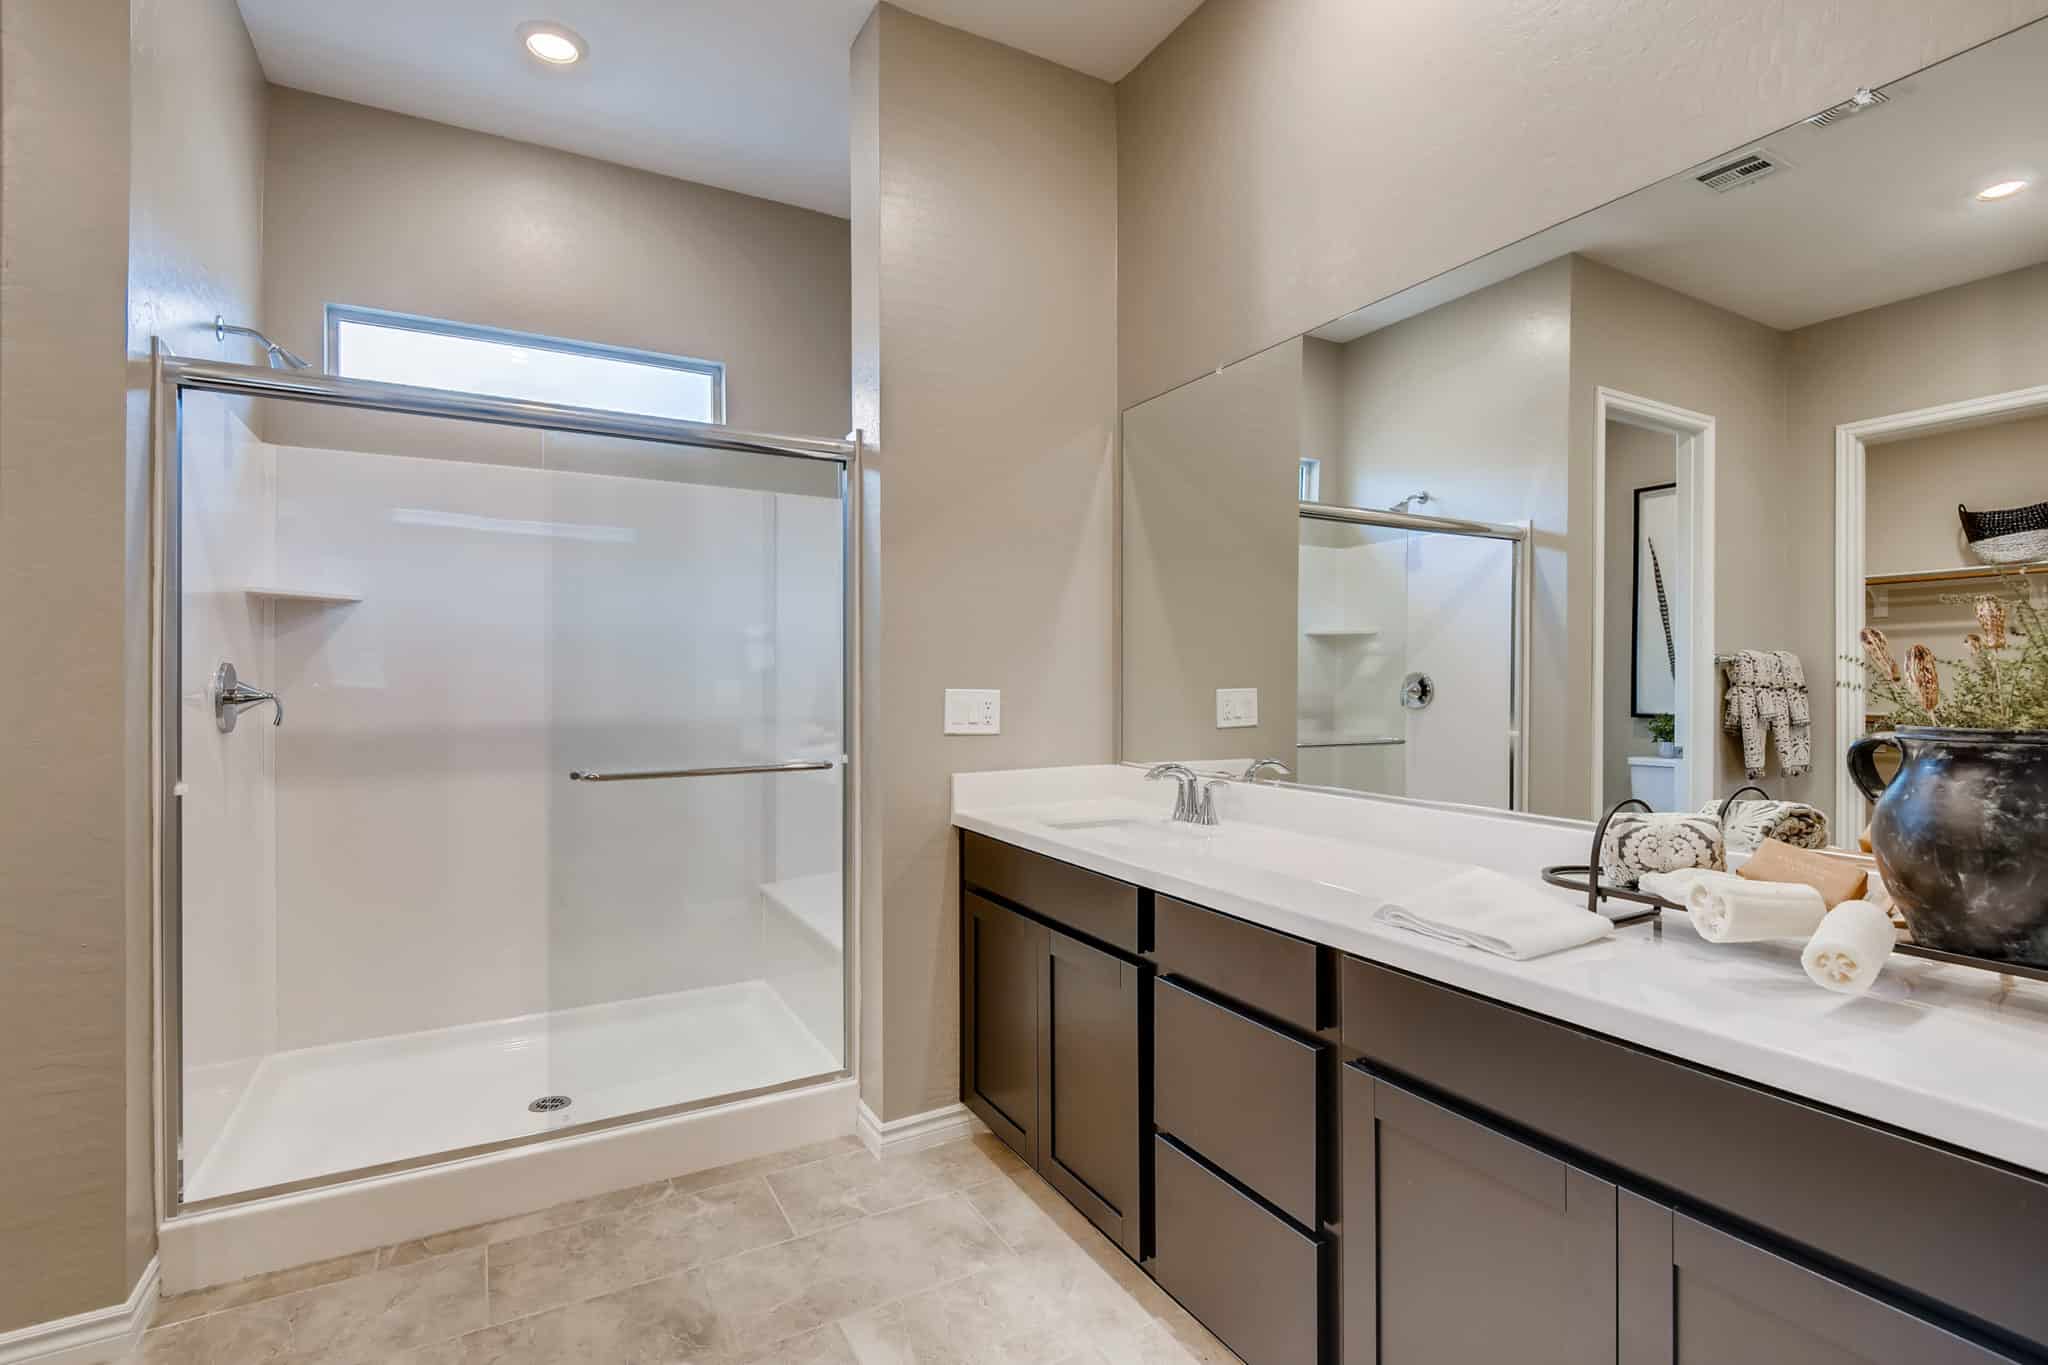 Primary Bathroom of Everly model at Heritage by Lennar